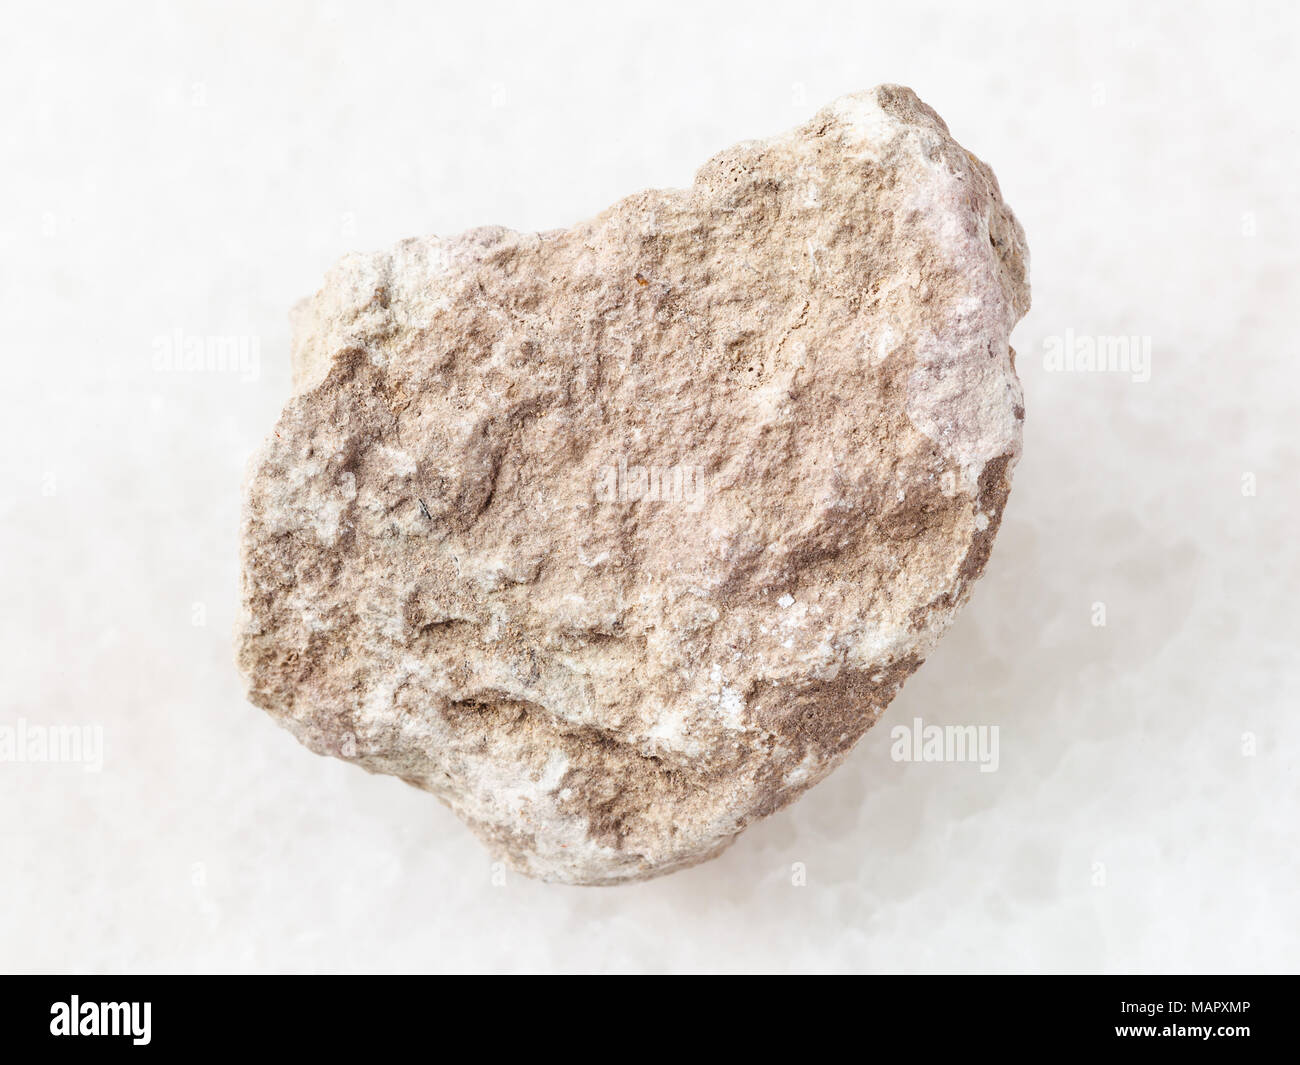 macro shooting of natural mineral rock specimen - rough marl stone on white marble background Stock Photo